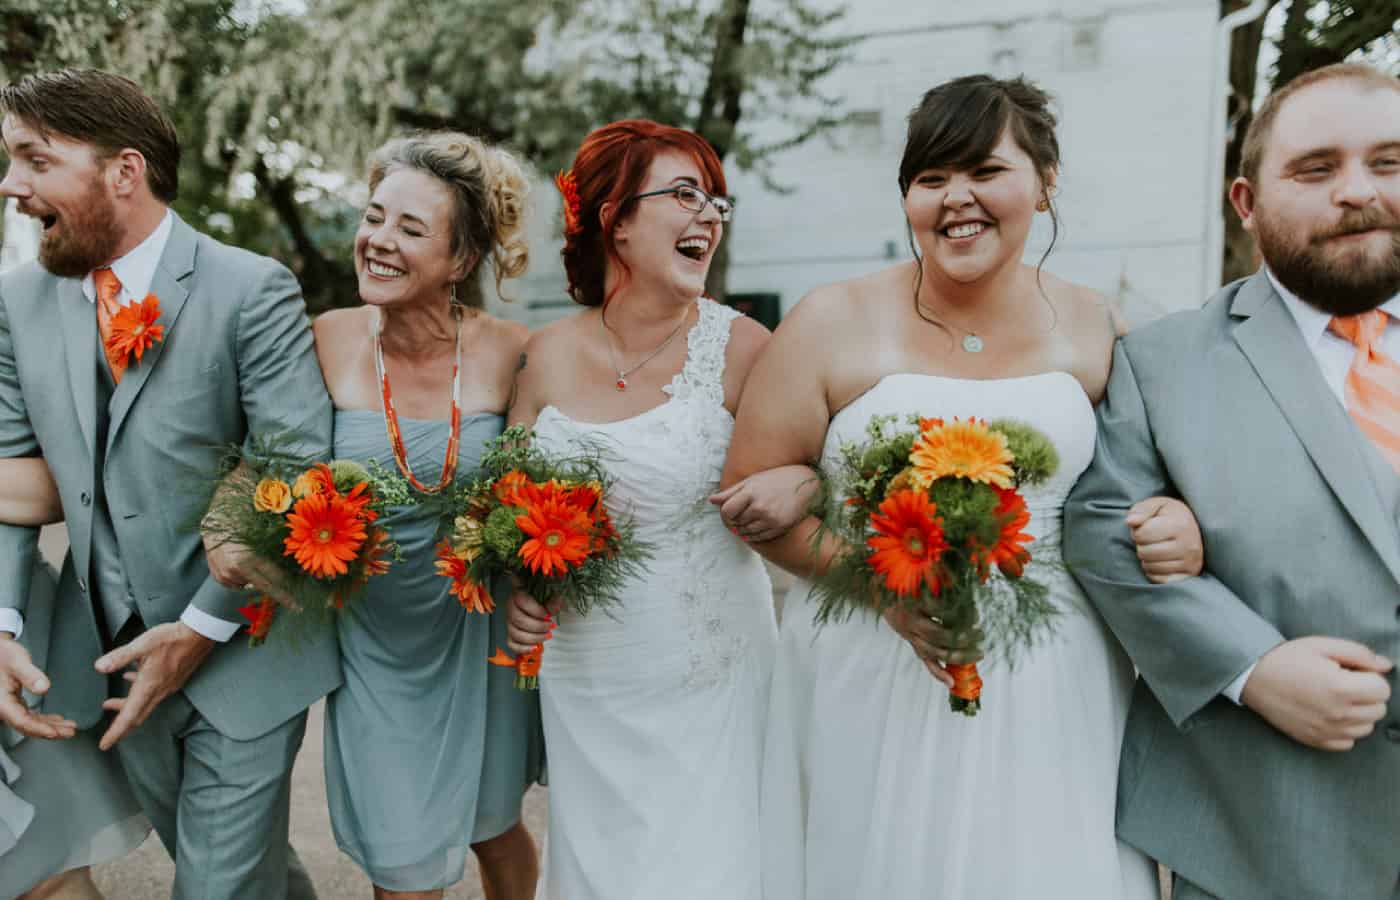 A bride laughs while walking arm-in-arm with her wedding party